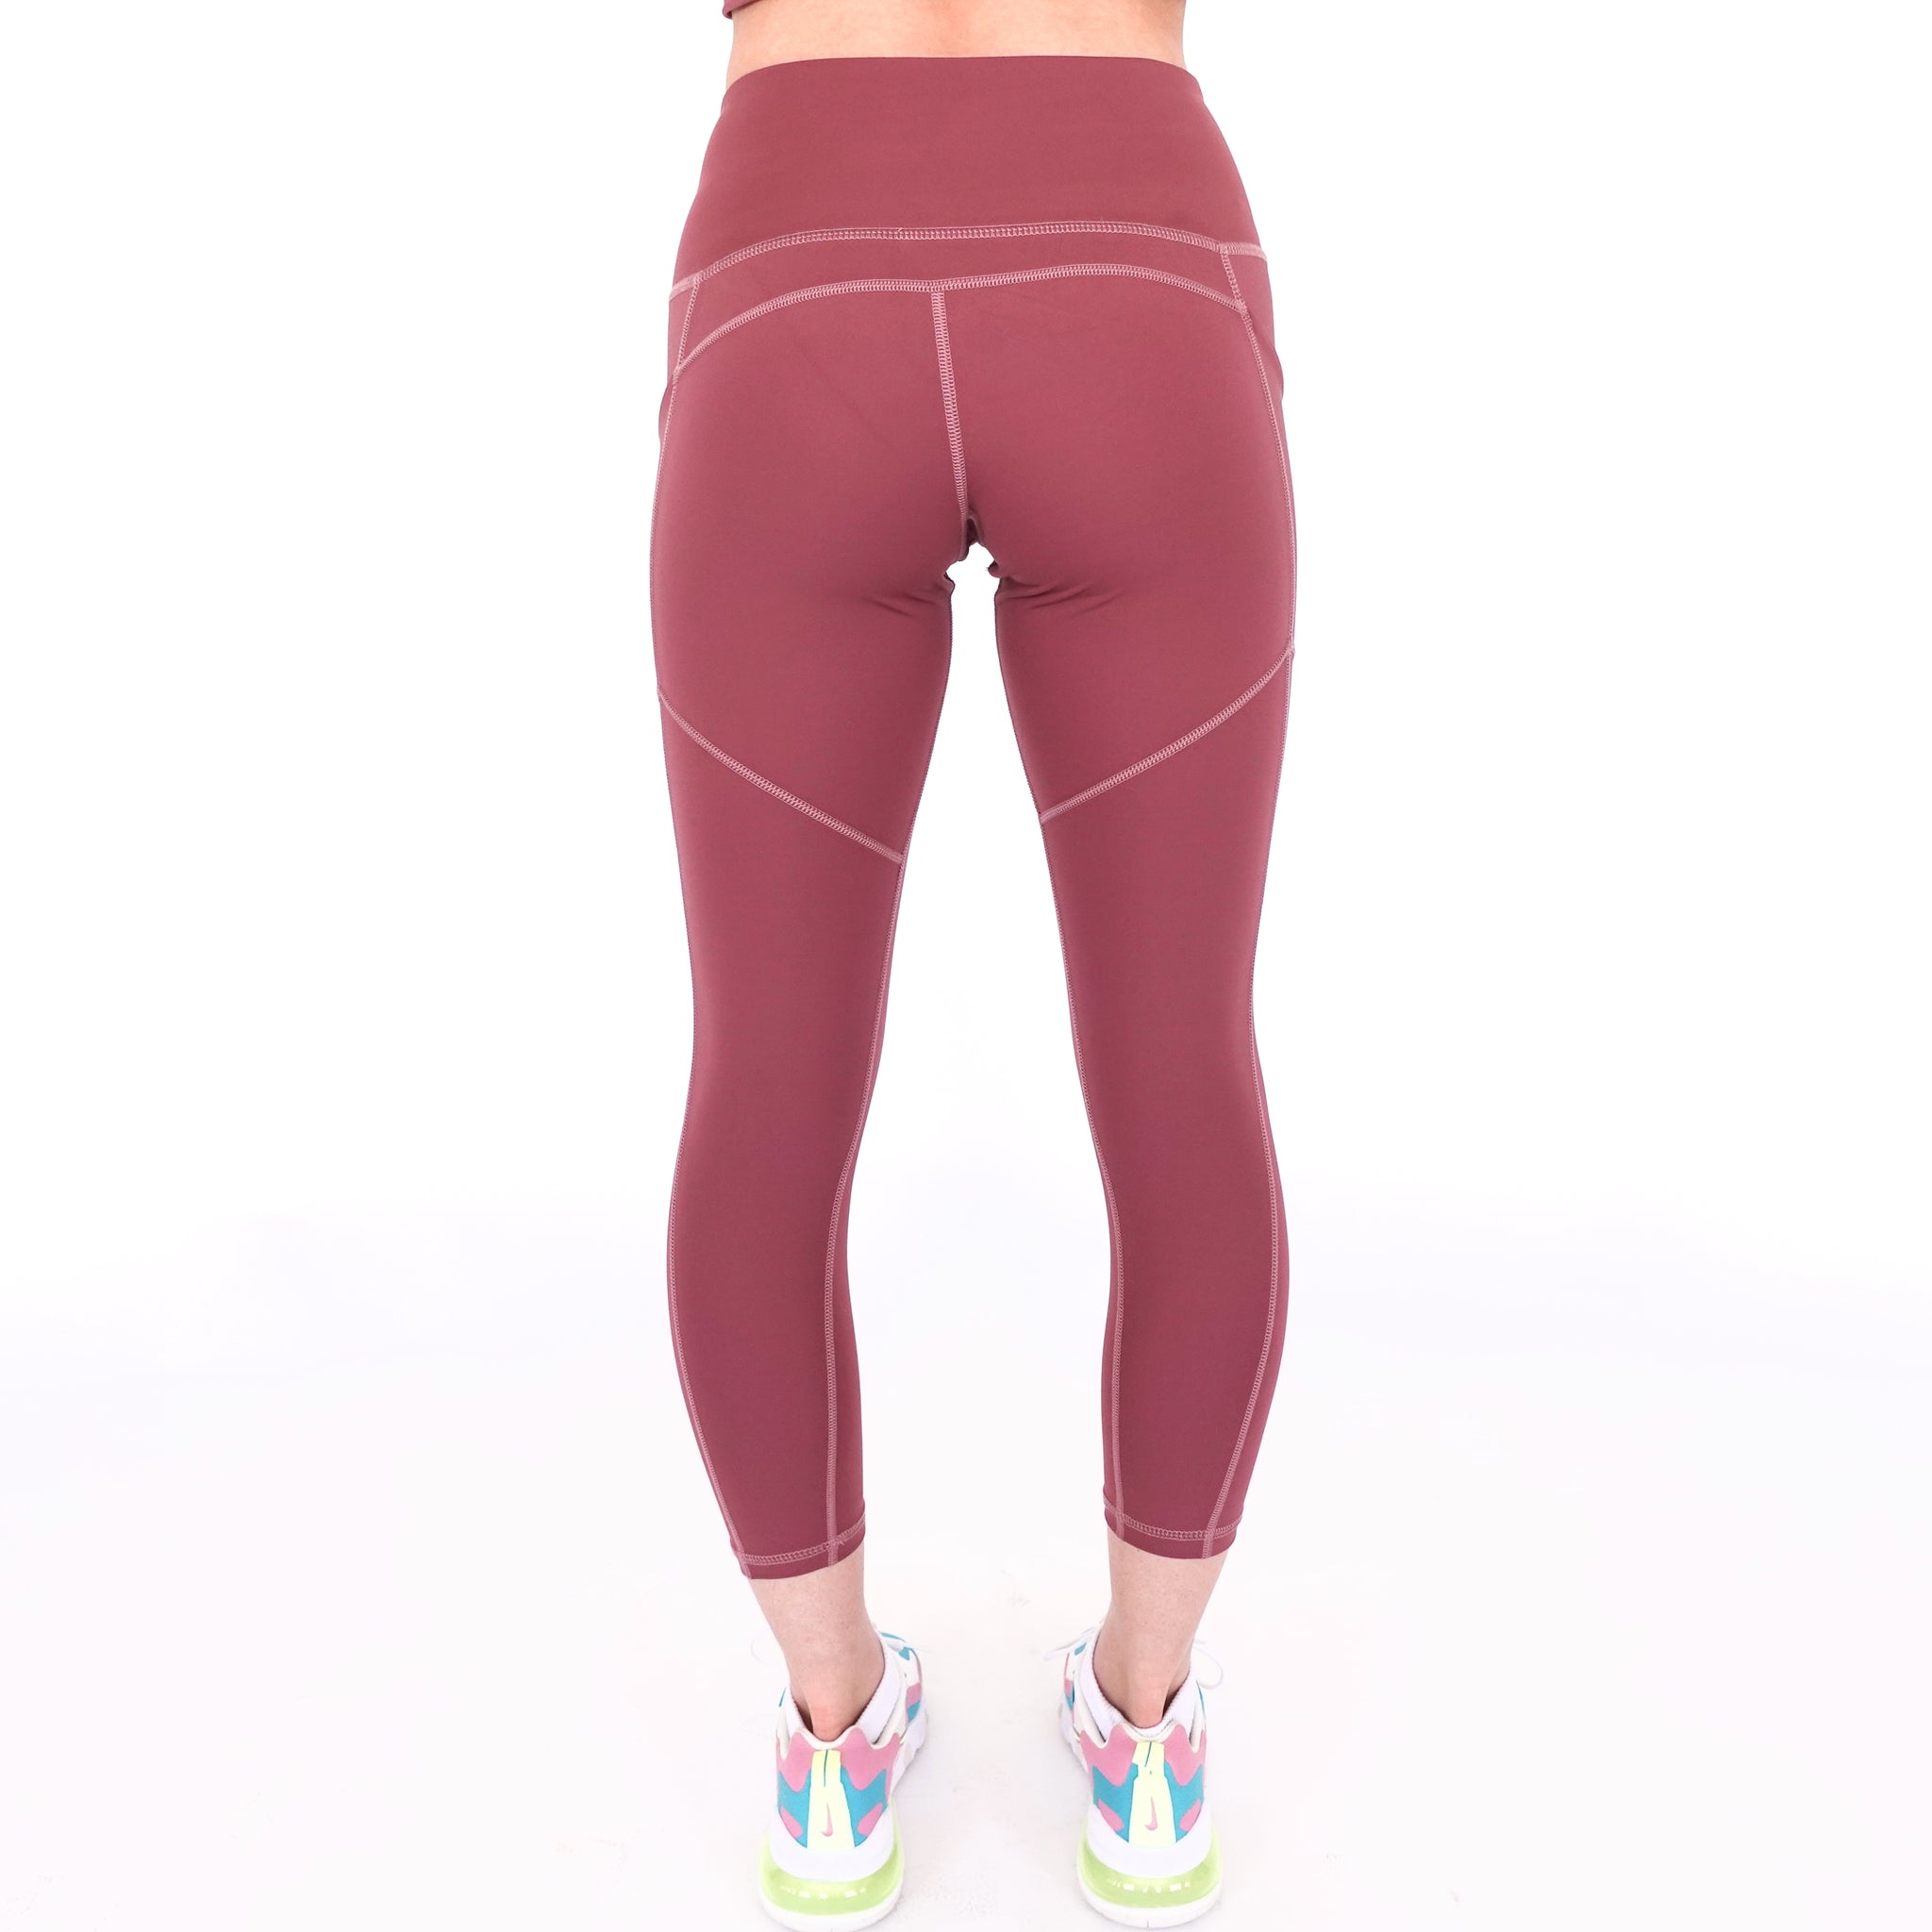 Seamless leggings PUSH UP modeling and slimming, SUNNY K113 dusty pink  MITARE Size S Color Dusty pink